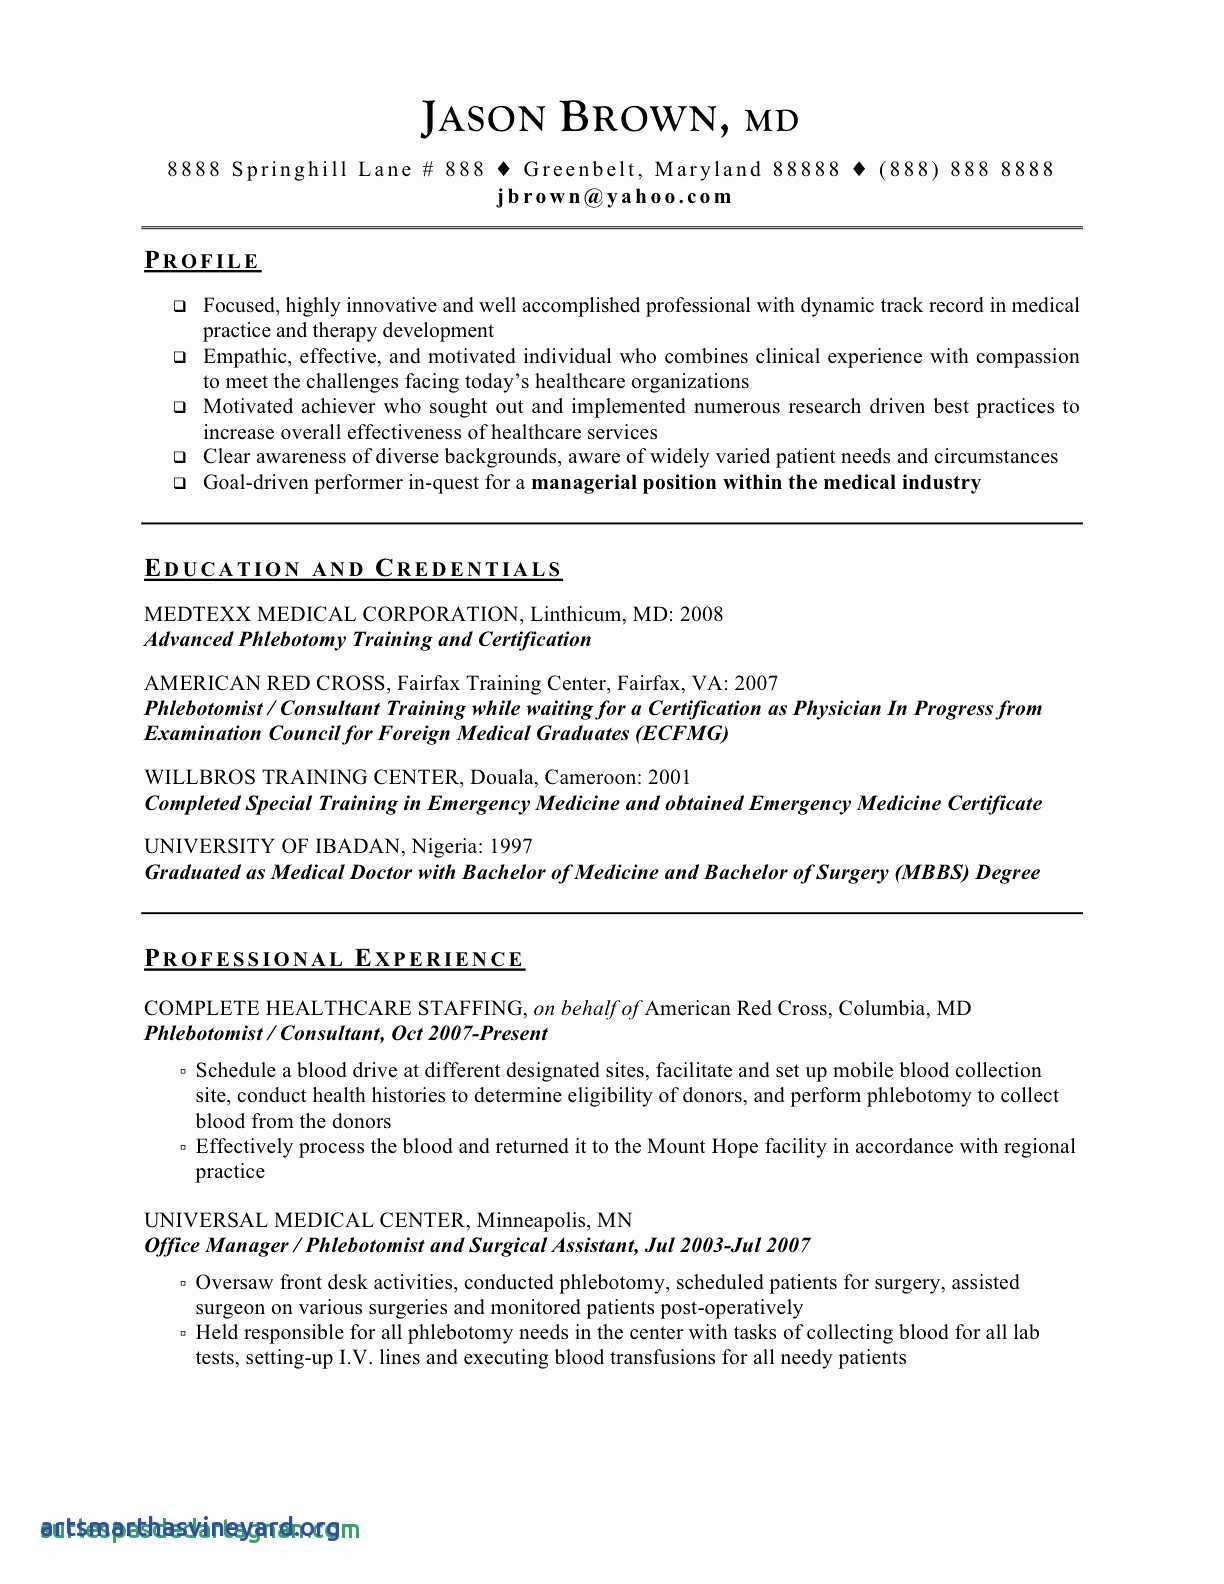 Phlebotomy Cover Letter Template - Awesome Phlebotomist Resume Samples Concept Free Web Templates